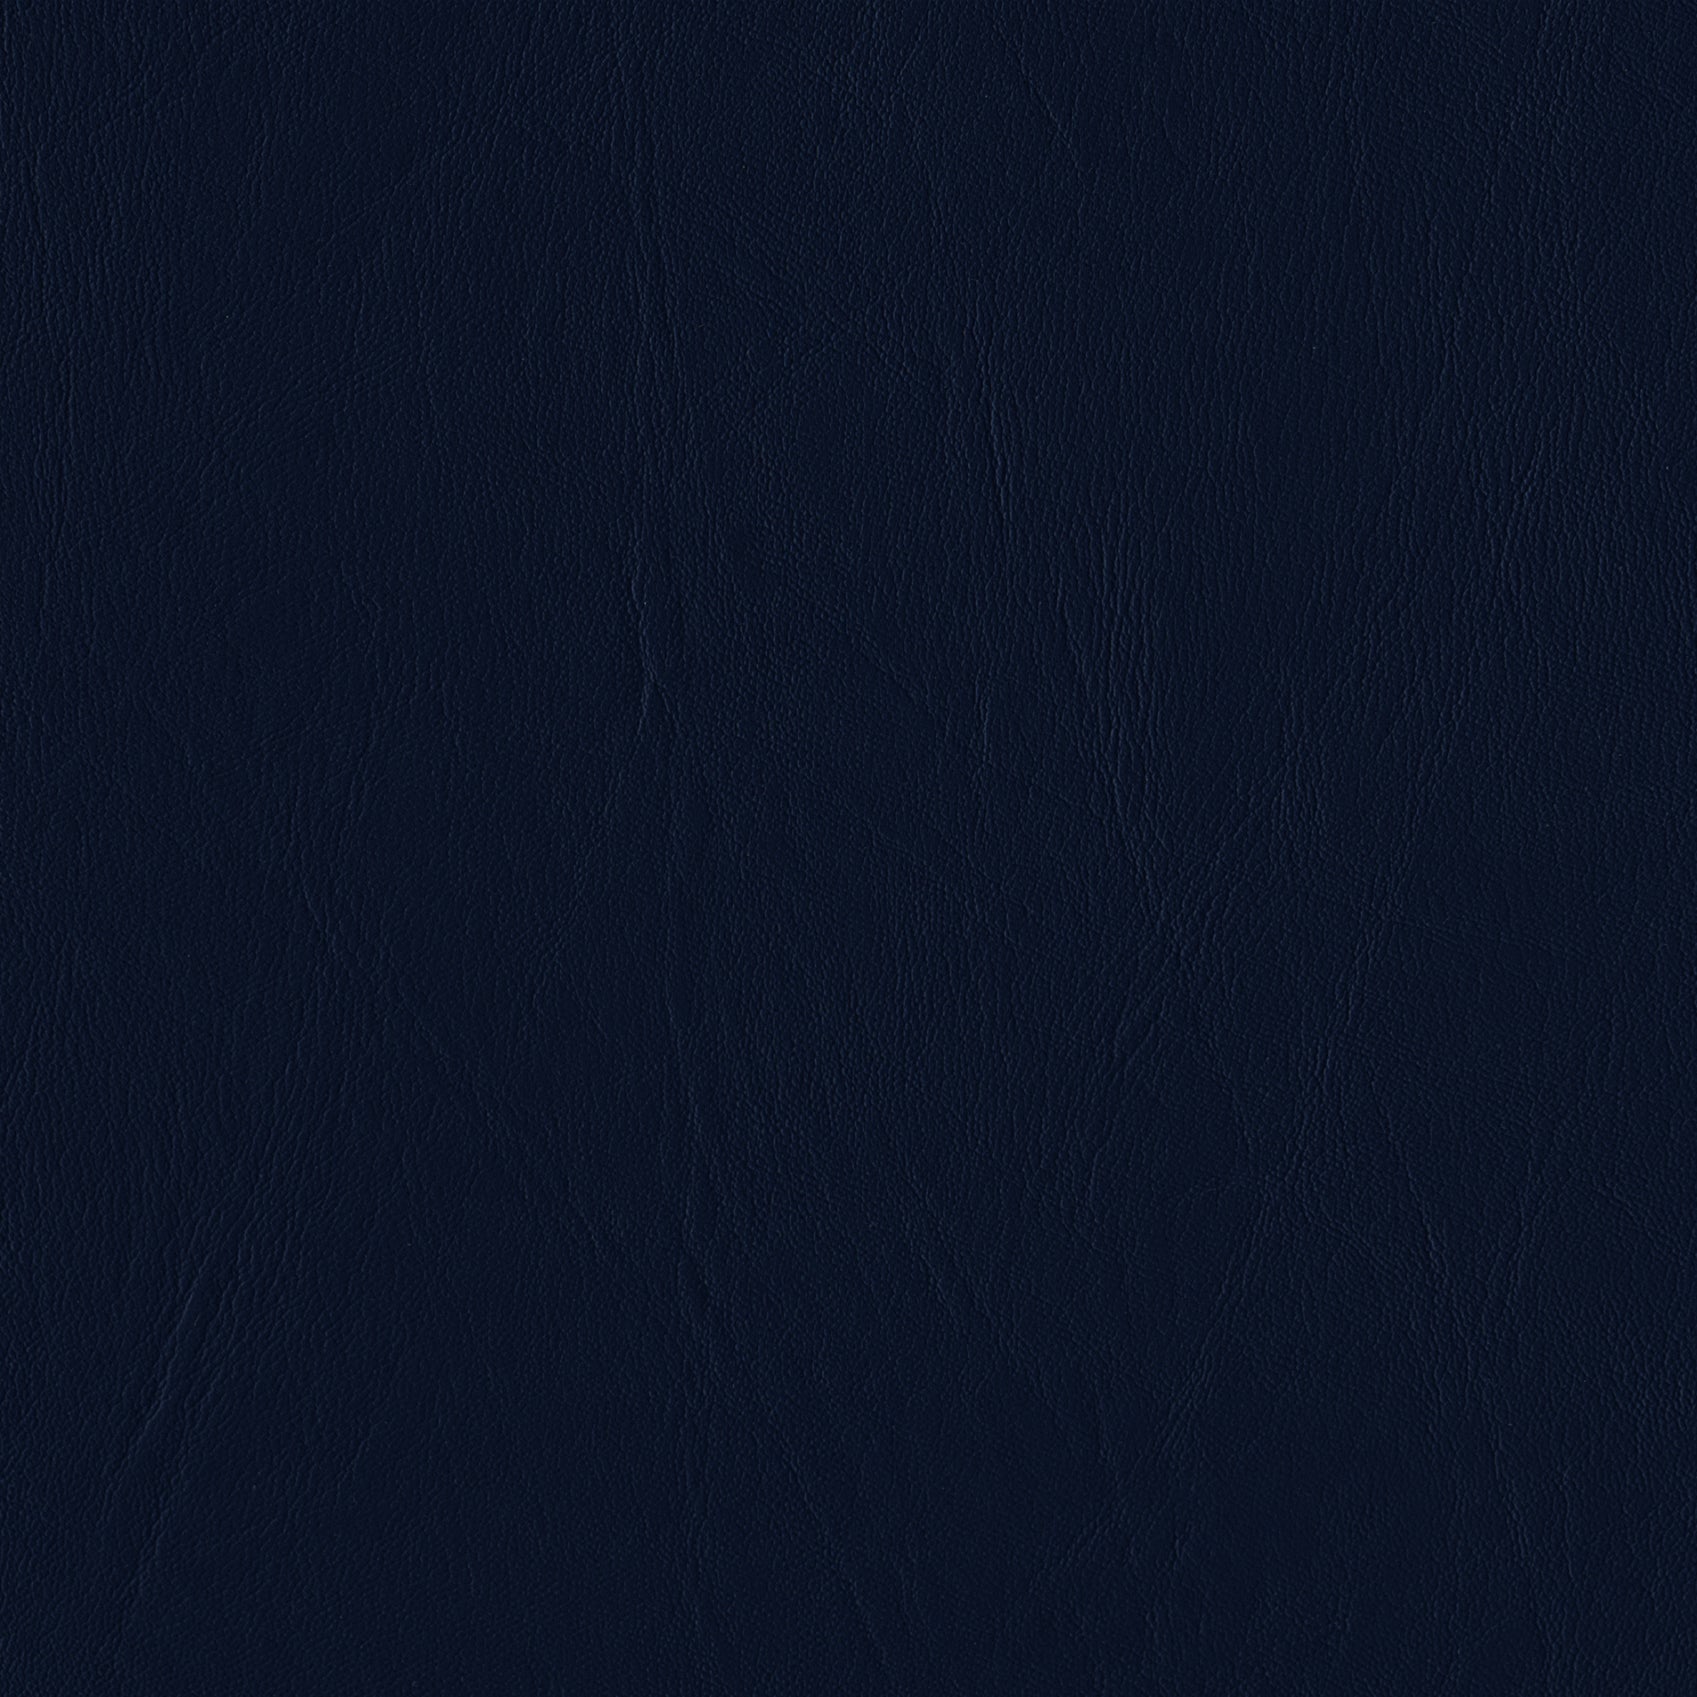    Andriali-Contract-Vinyl_Upholstery-Design-Sade-Color-520FrenchNavy-Width-140cm